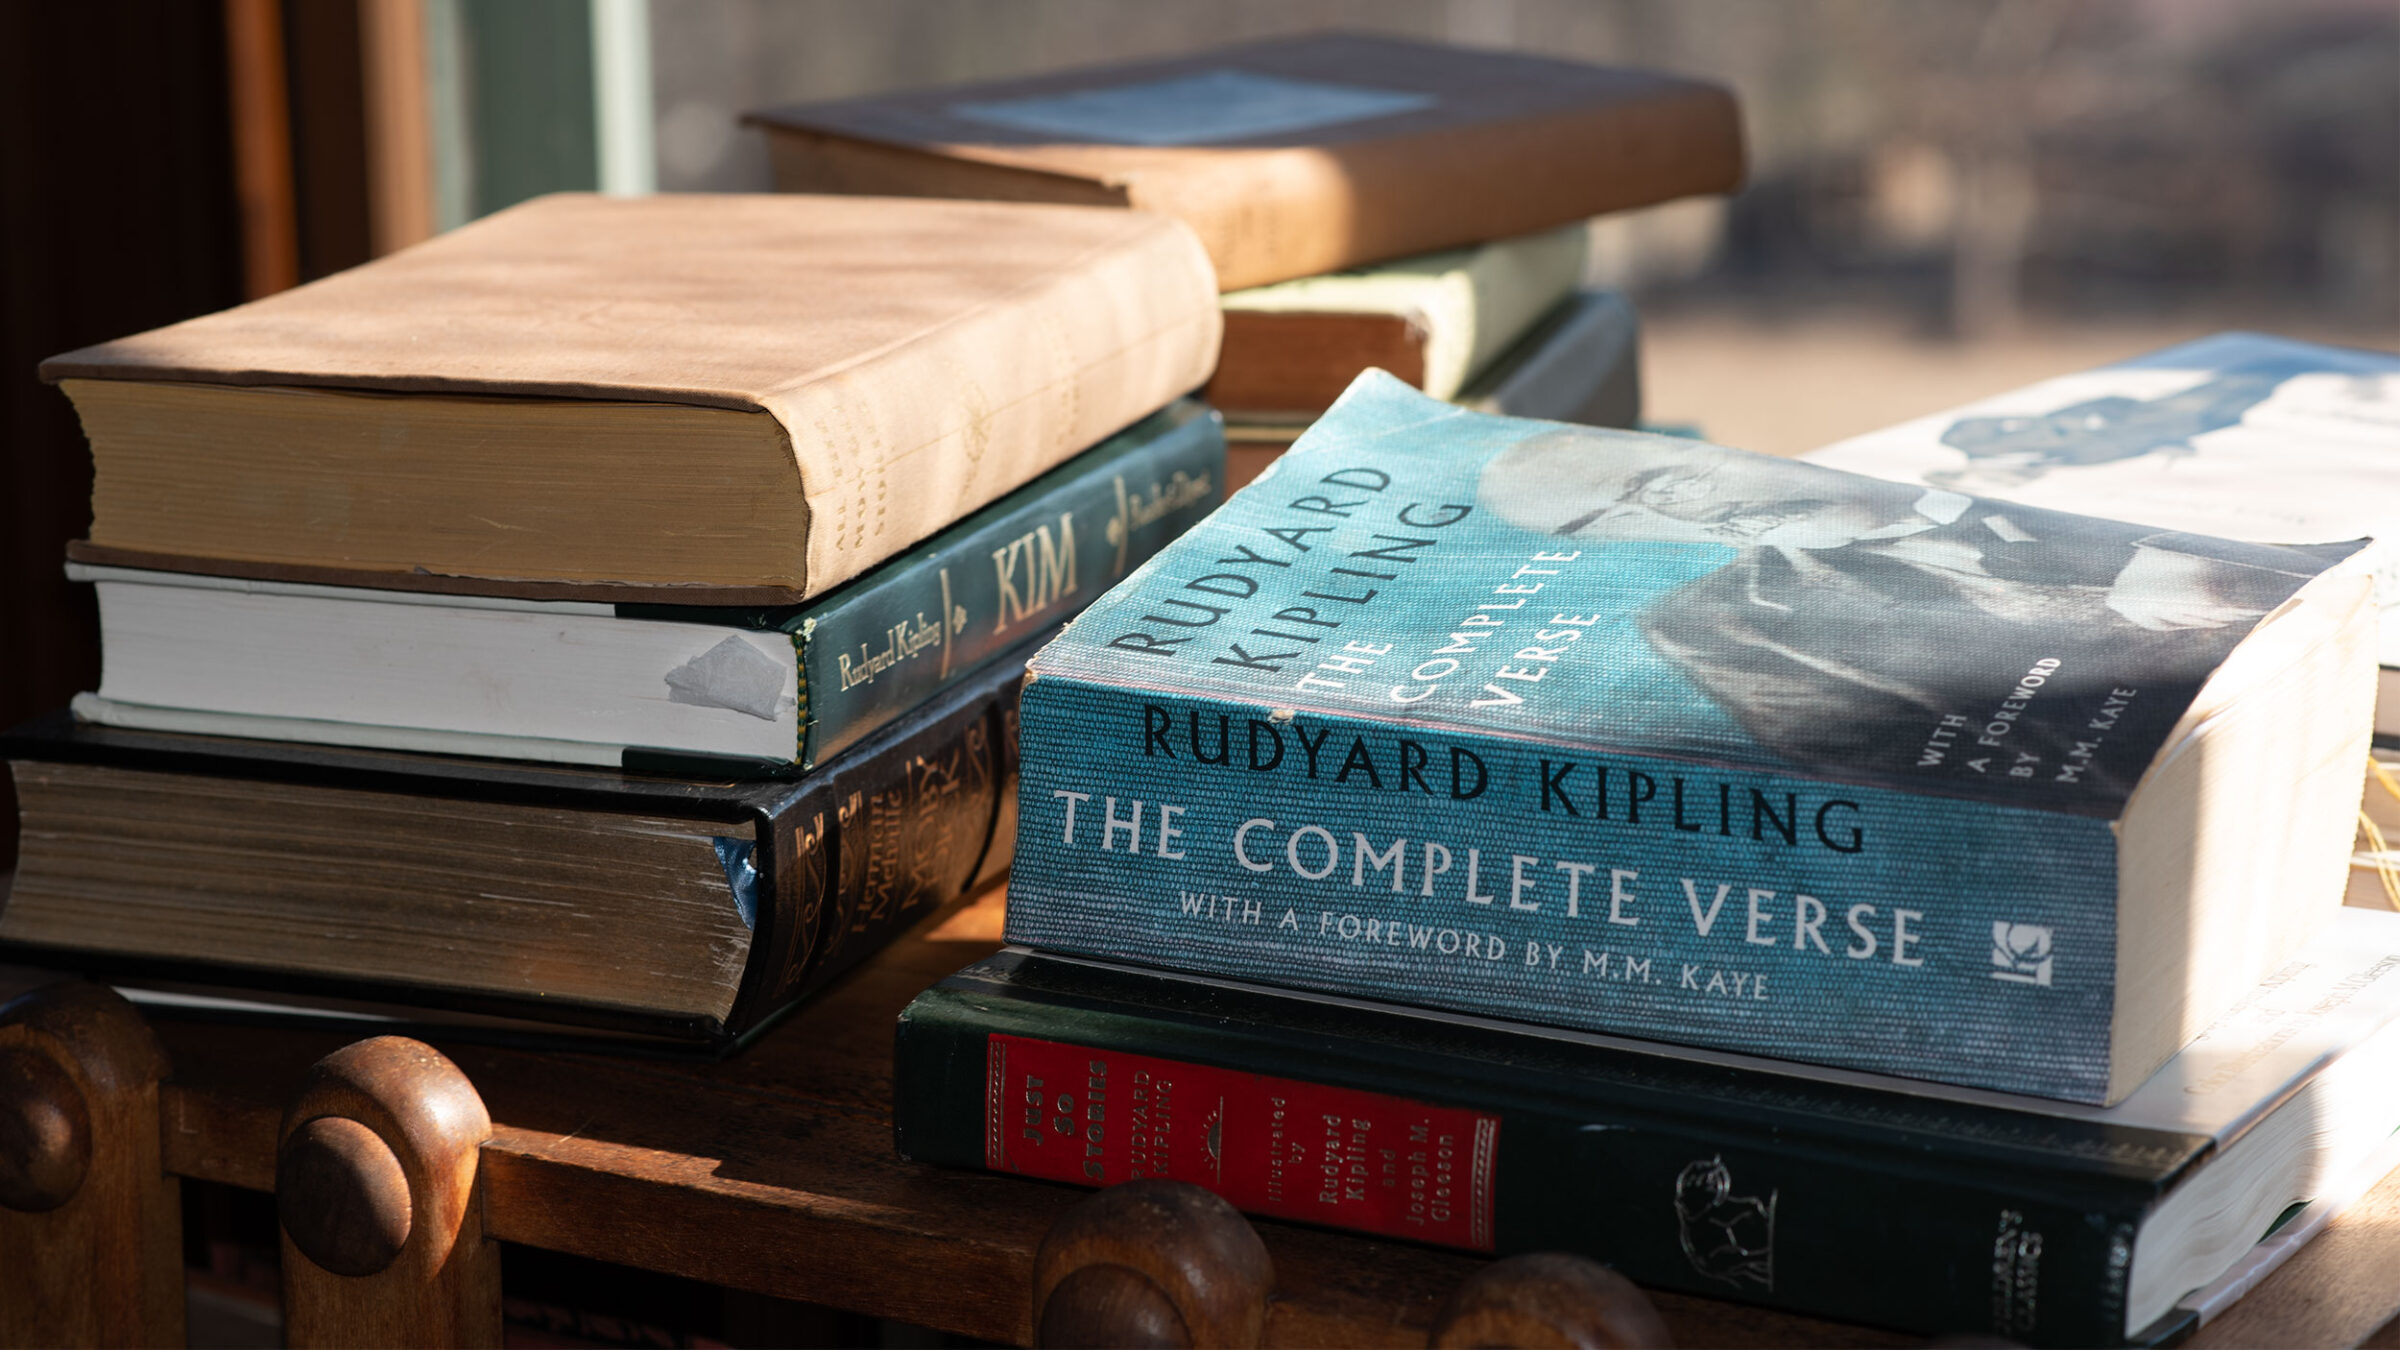 books by Rudyard Kipling are stacked on a table